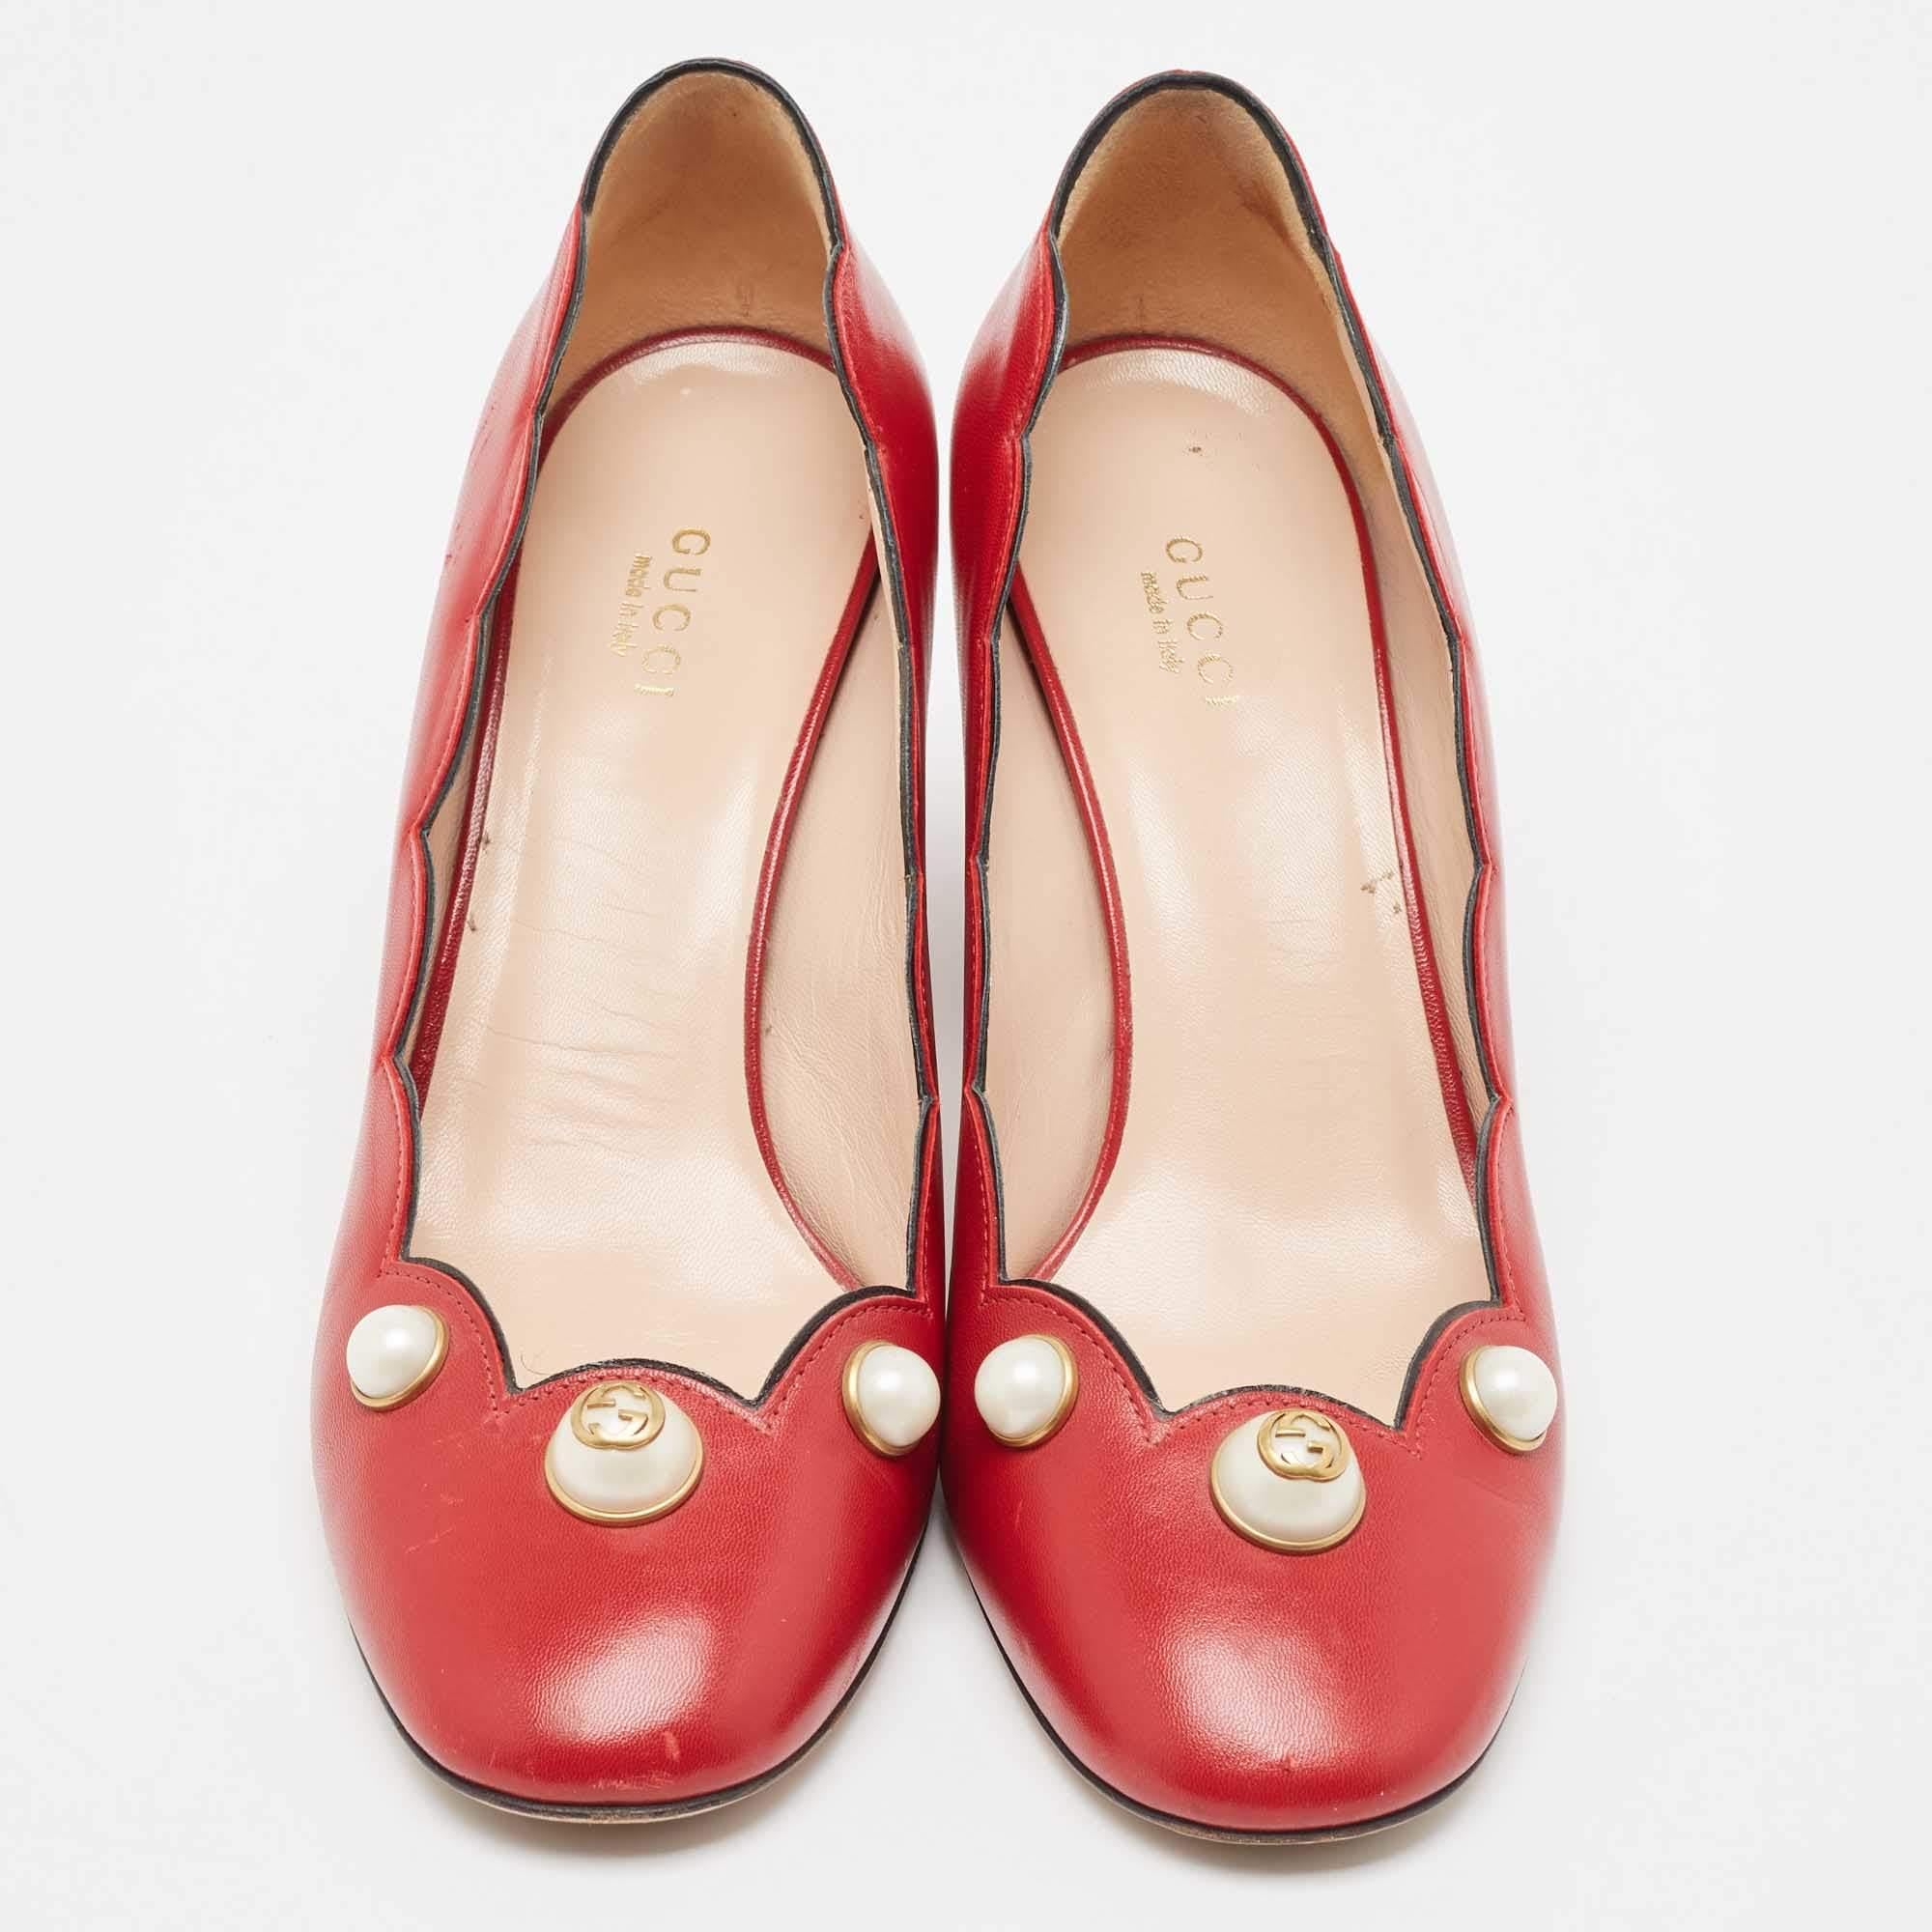 Women's Gucci Red Leather Willow Faux Pearl Block Heel Pumps Size 38